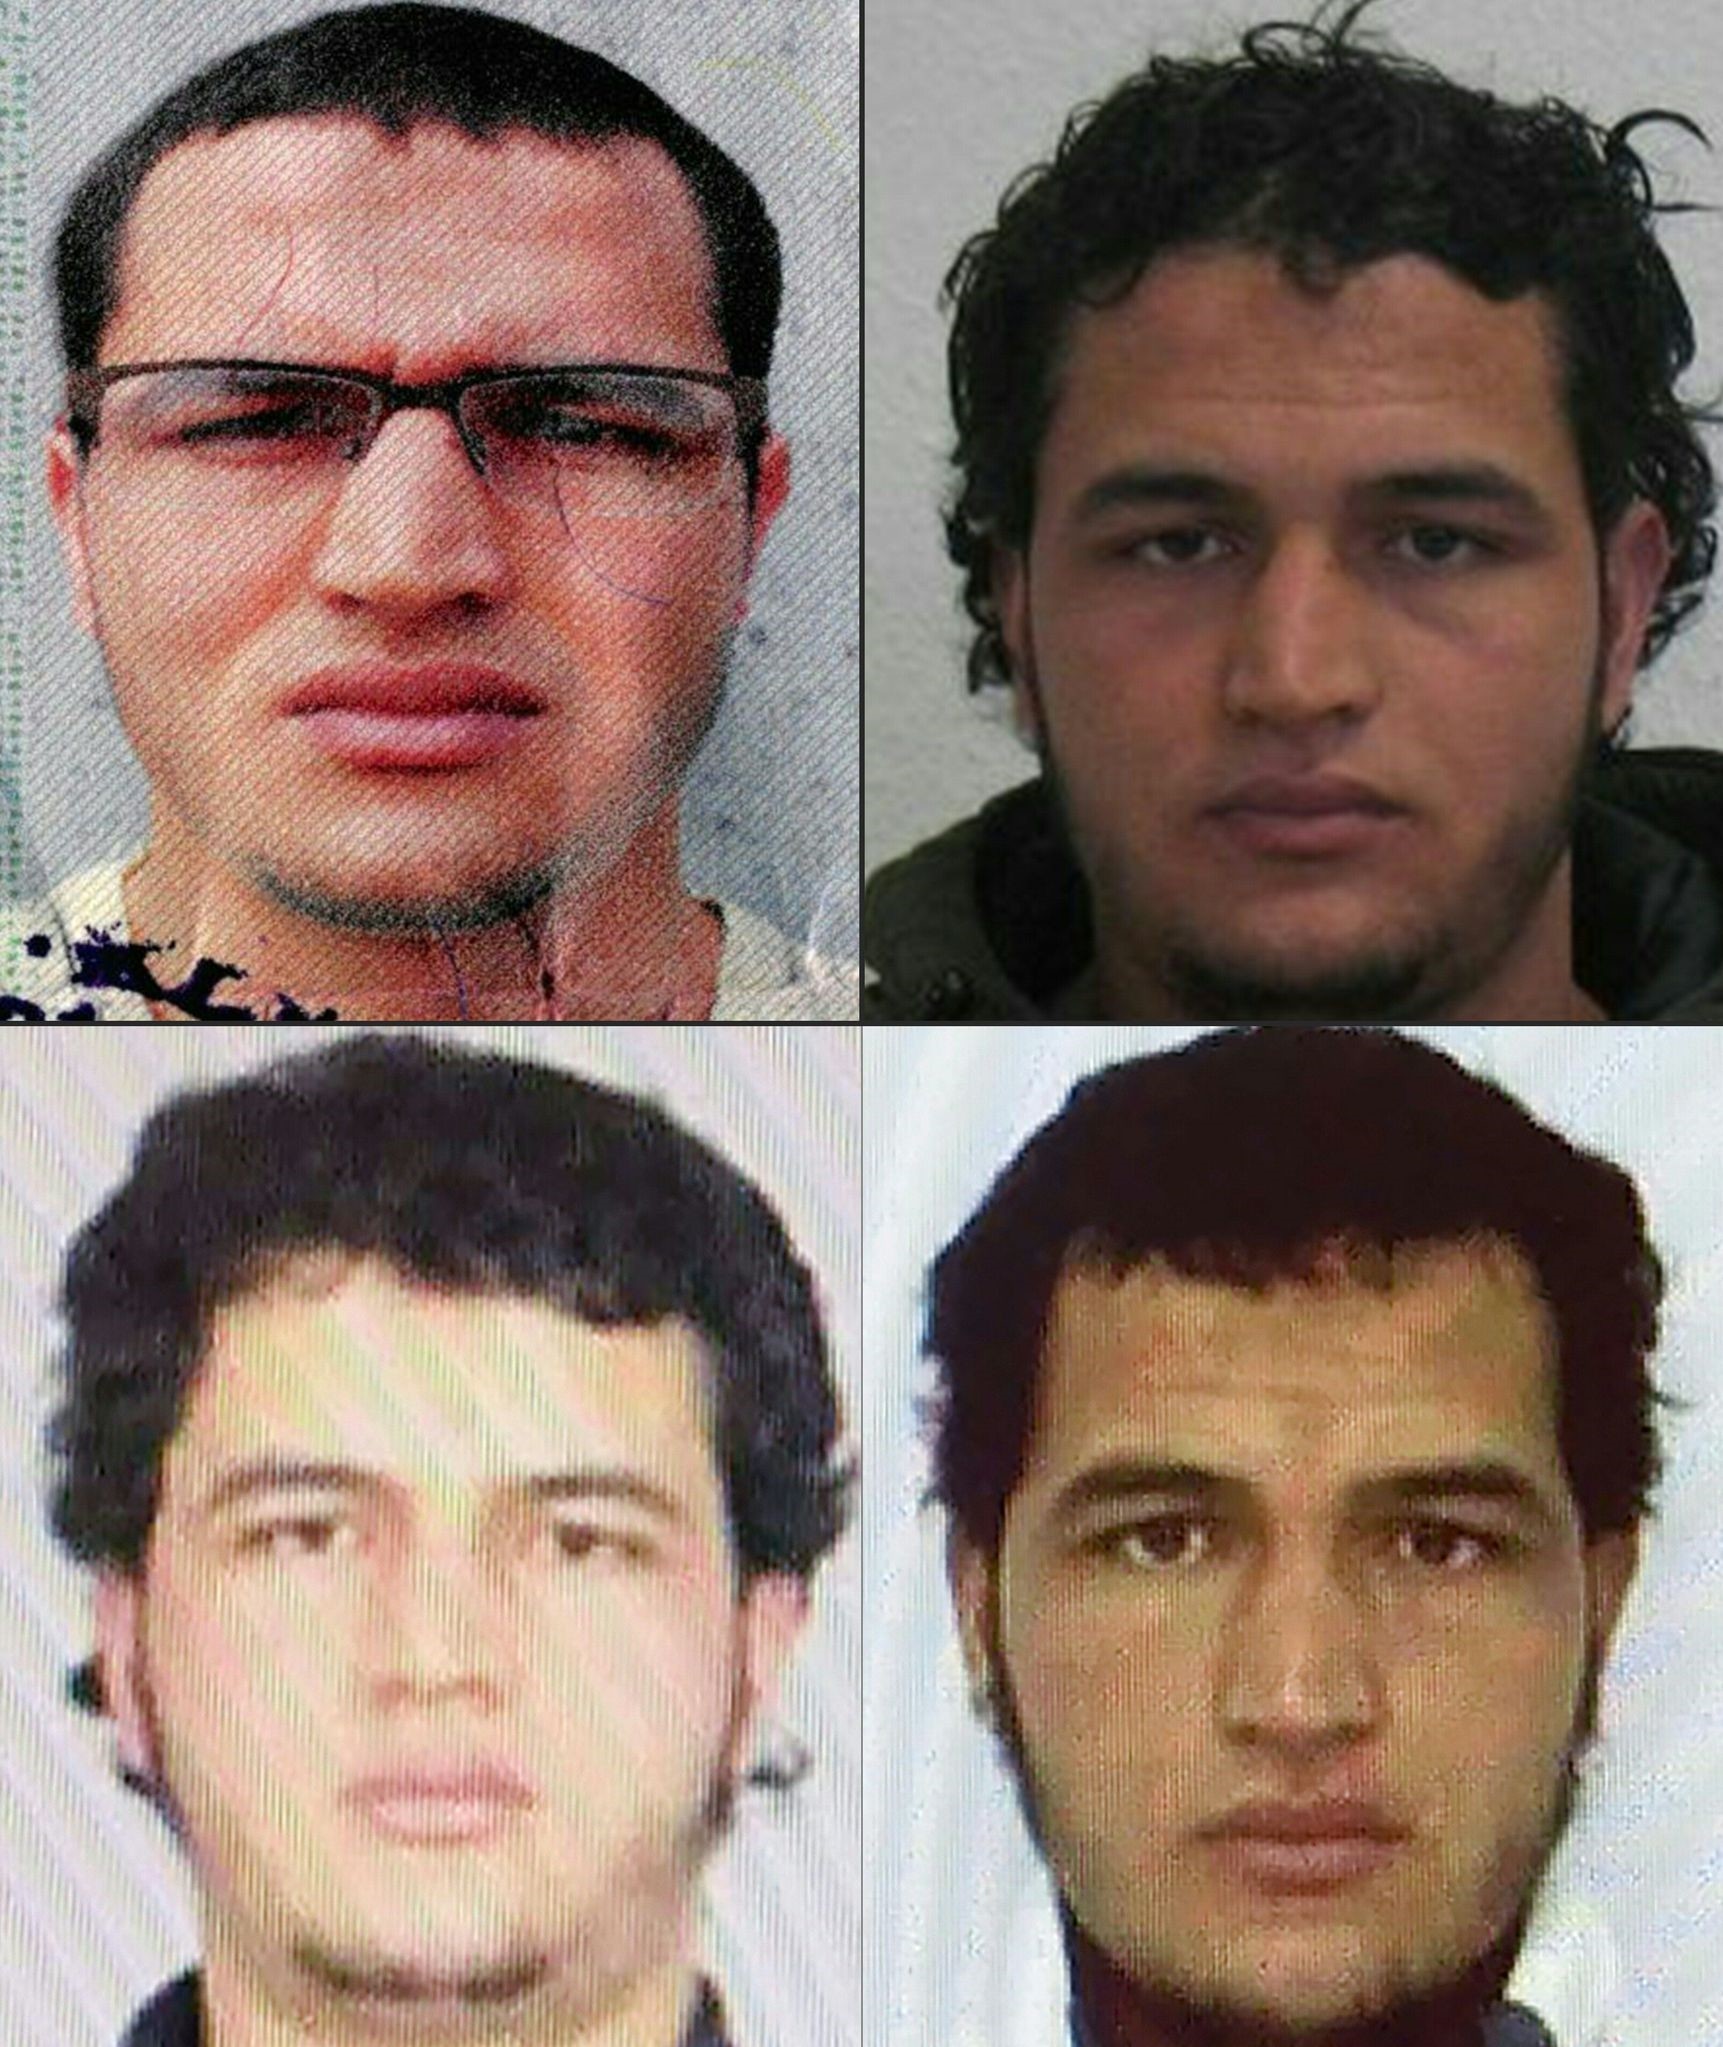 This combination of pictures created shows handout portraits showing two pictures of Tunisian man identified as Anis Amri.